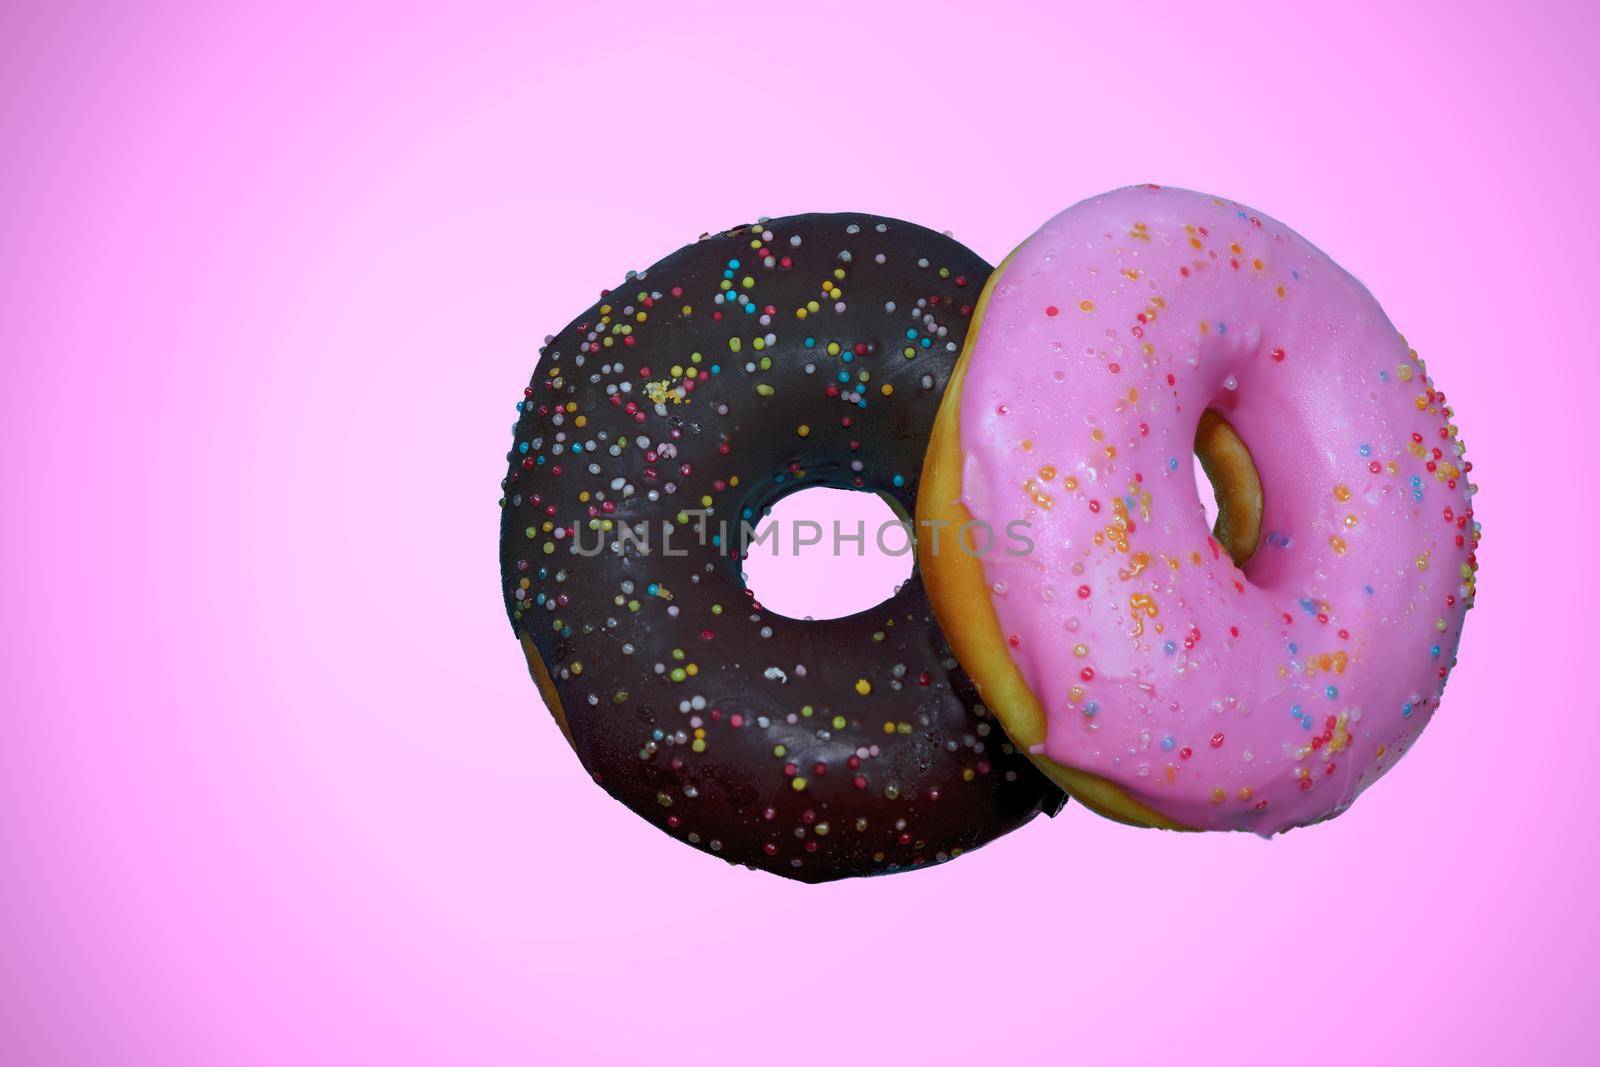 Pink Cream Donuts and Chocolate Donuts Pink background isolated.